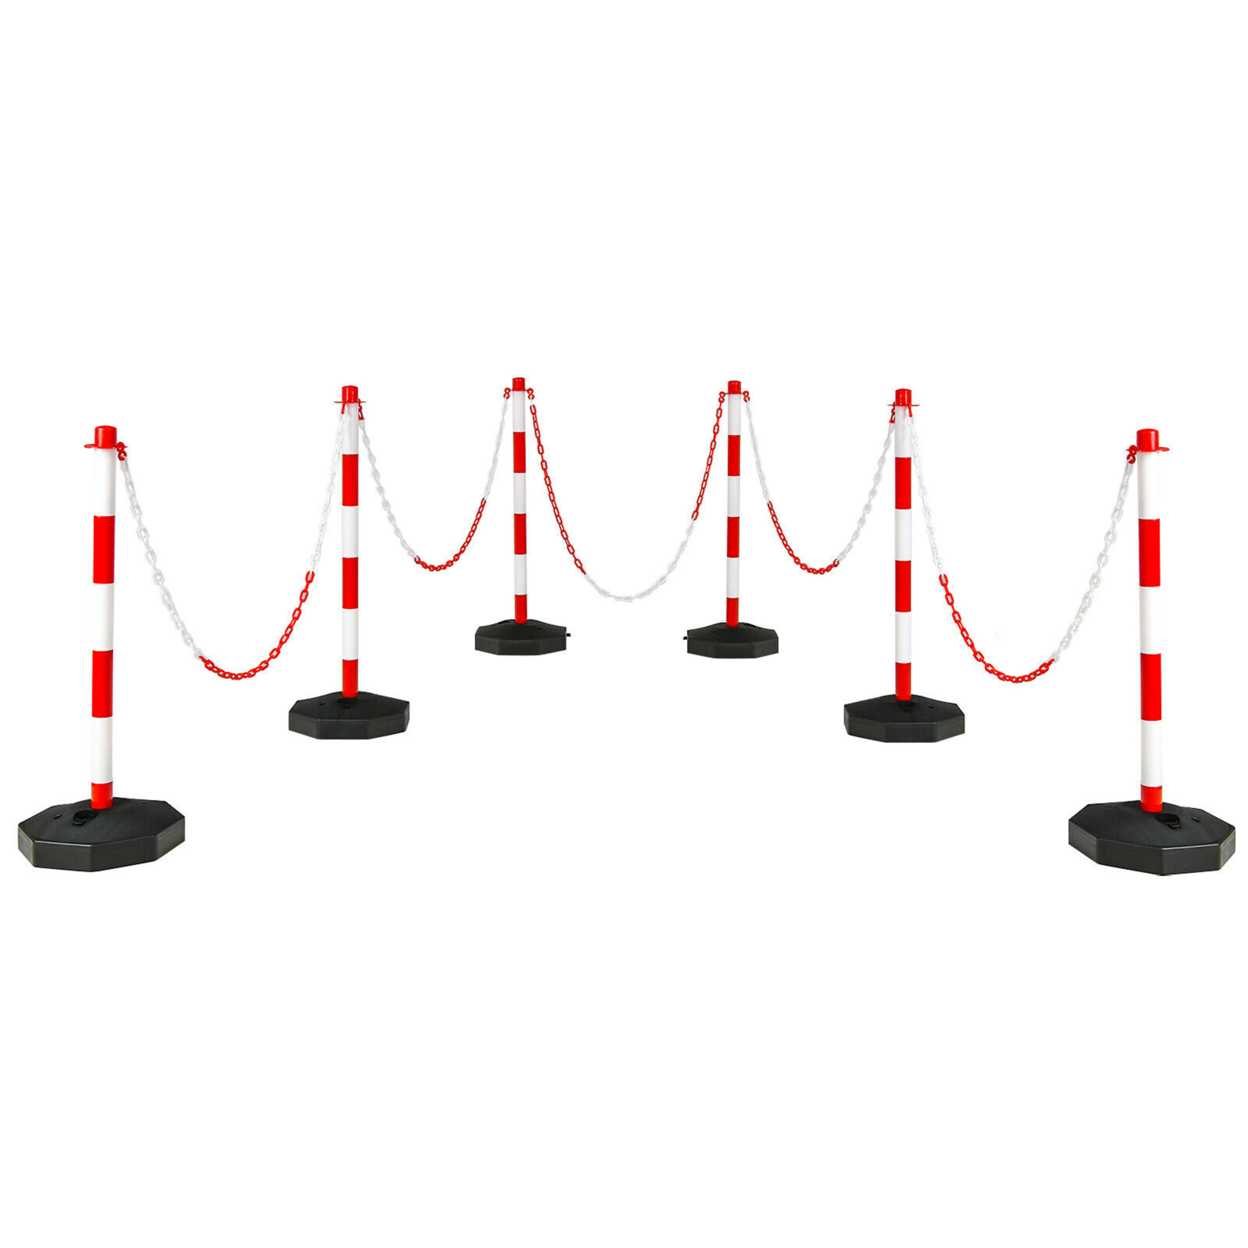 6PCS Traffic Delineator Pole Safety Caution Barrier W/ 5ft Link Chains - White & Red